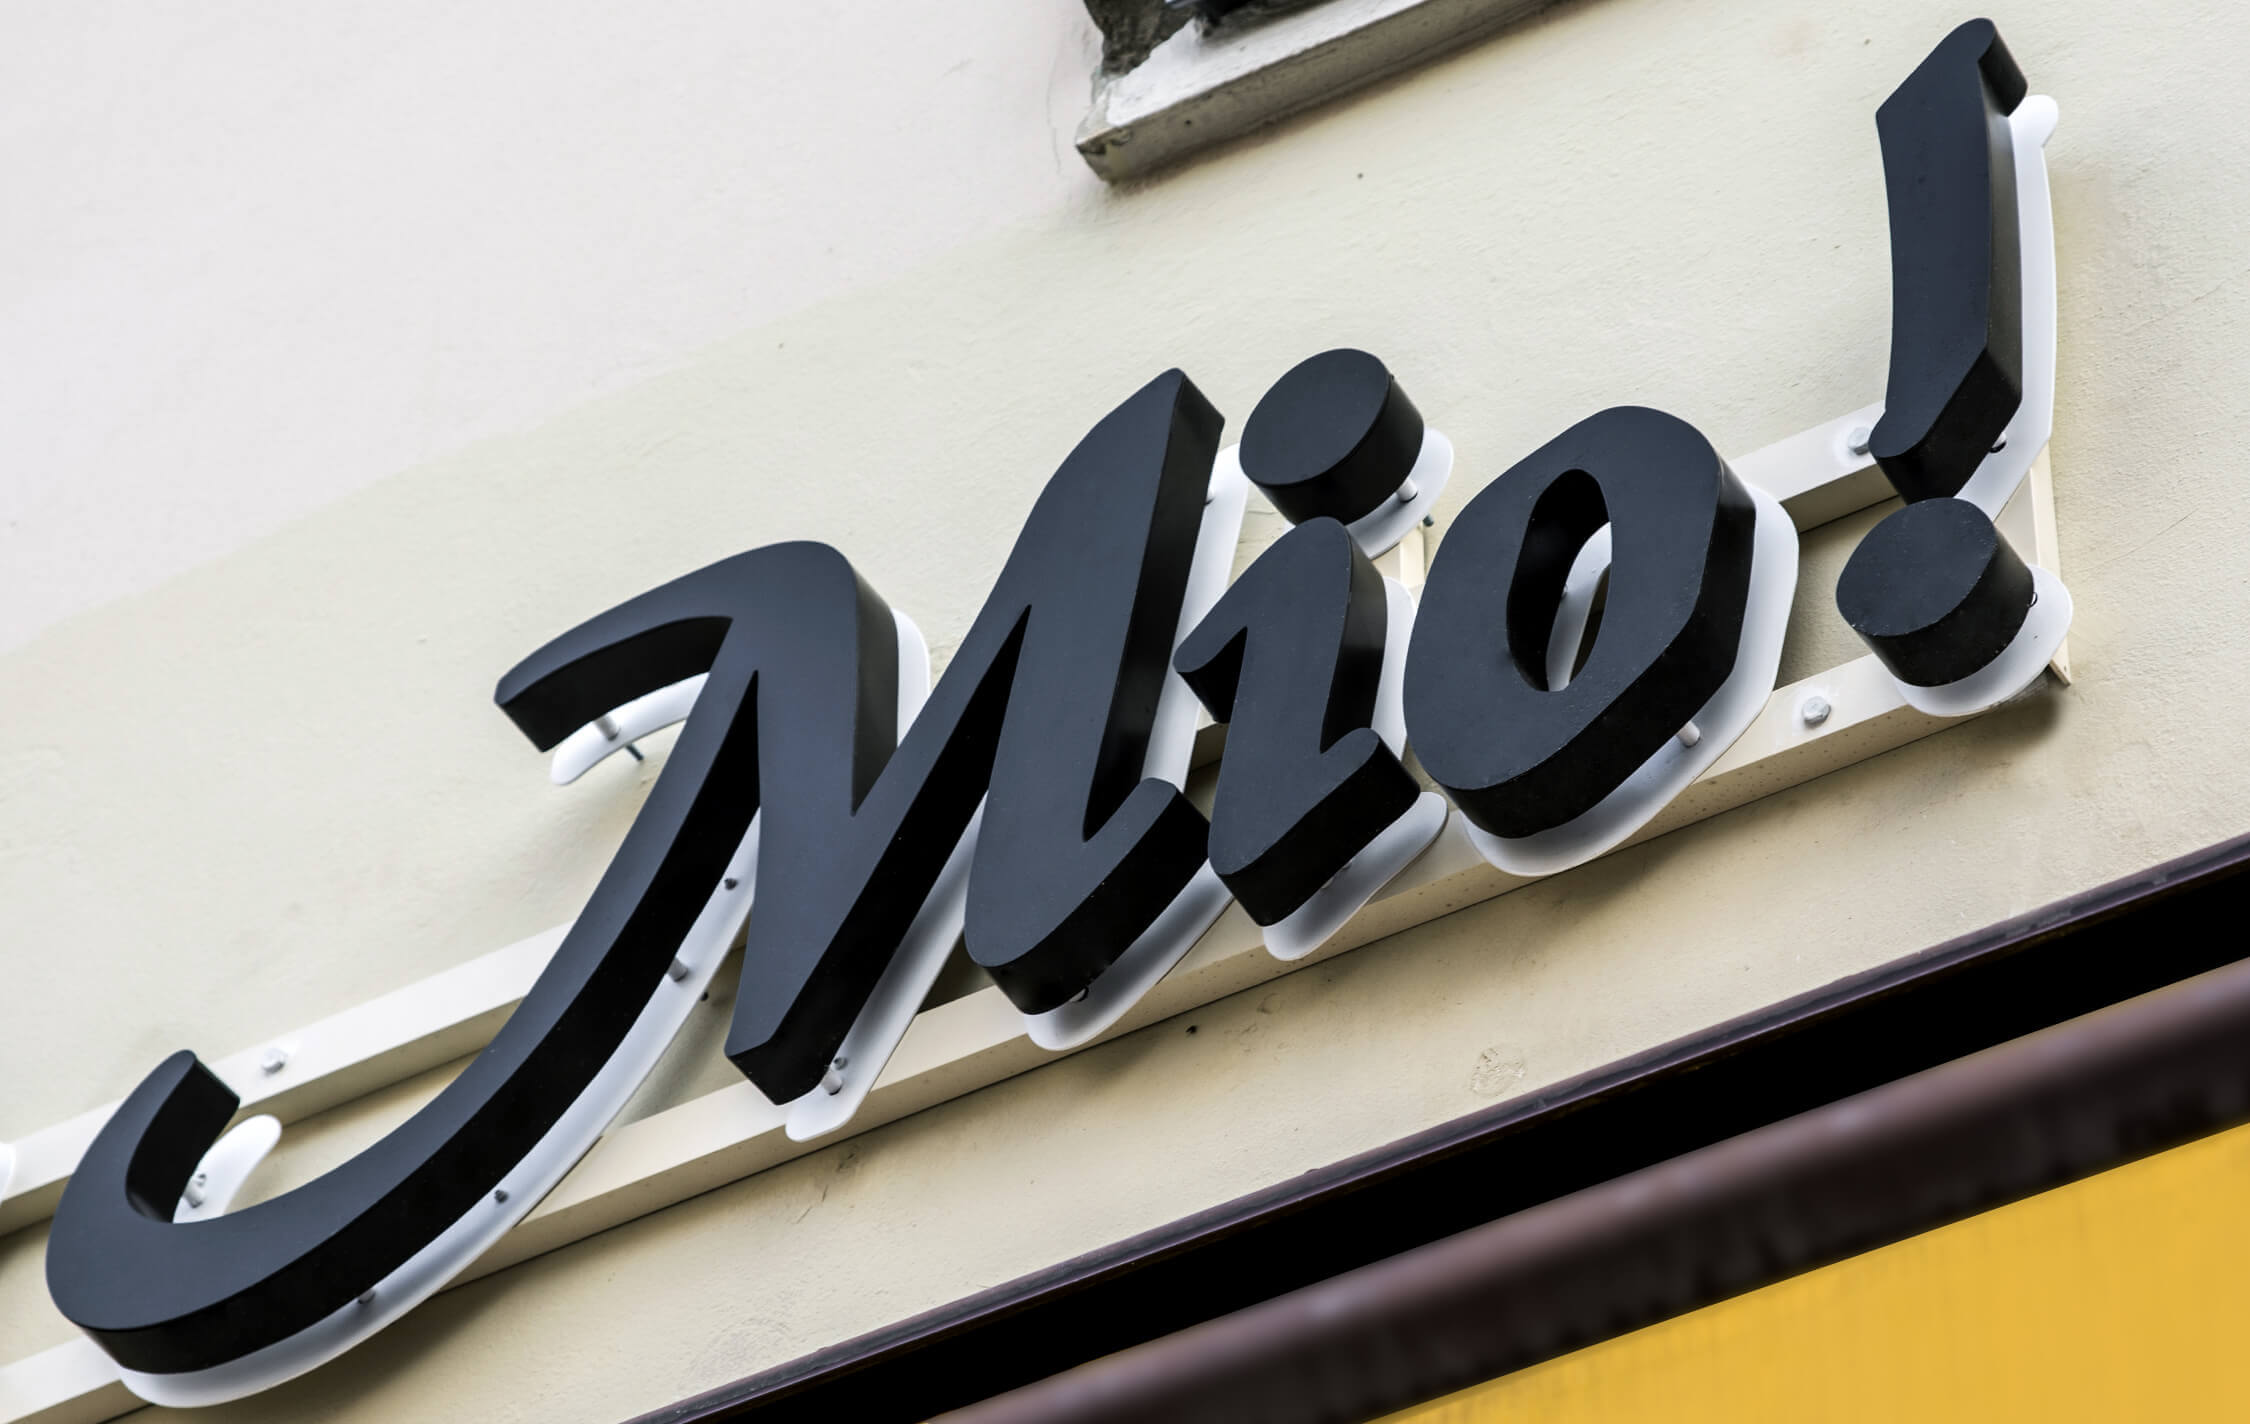 Sole Sole Mio - O Sole Mio - aluminium illuminated letters with halo effect mounted on a frame above the entrance